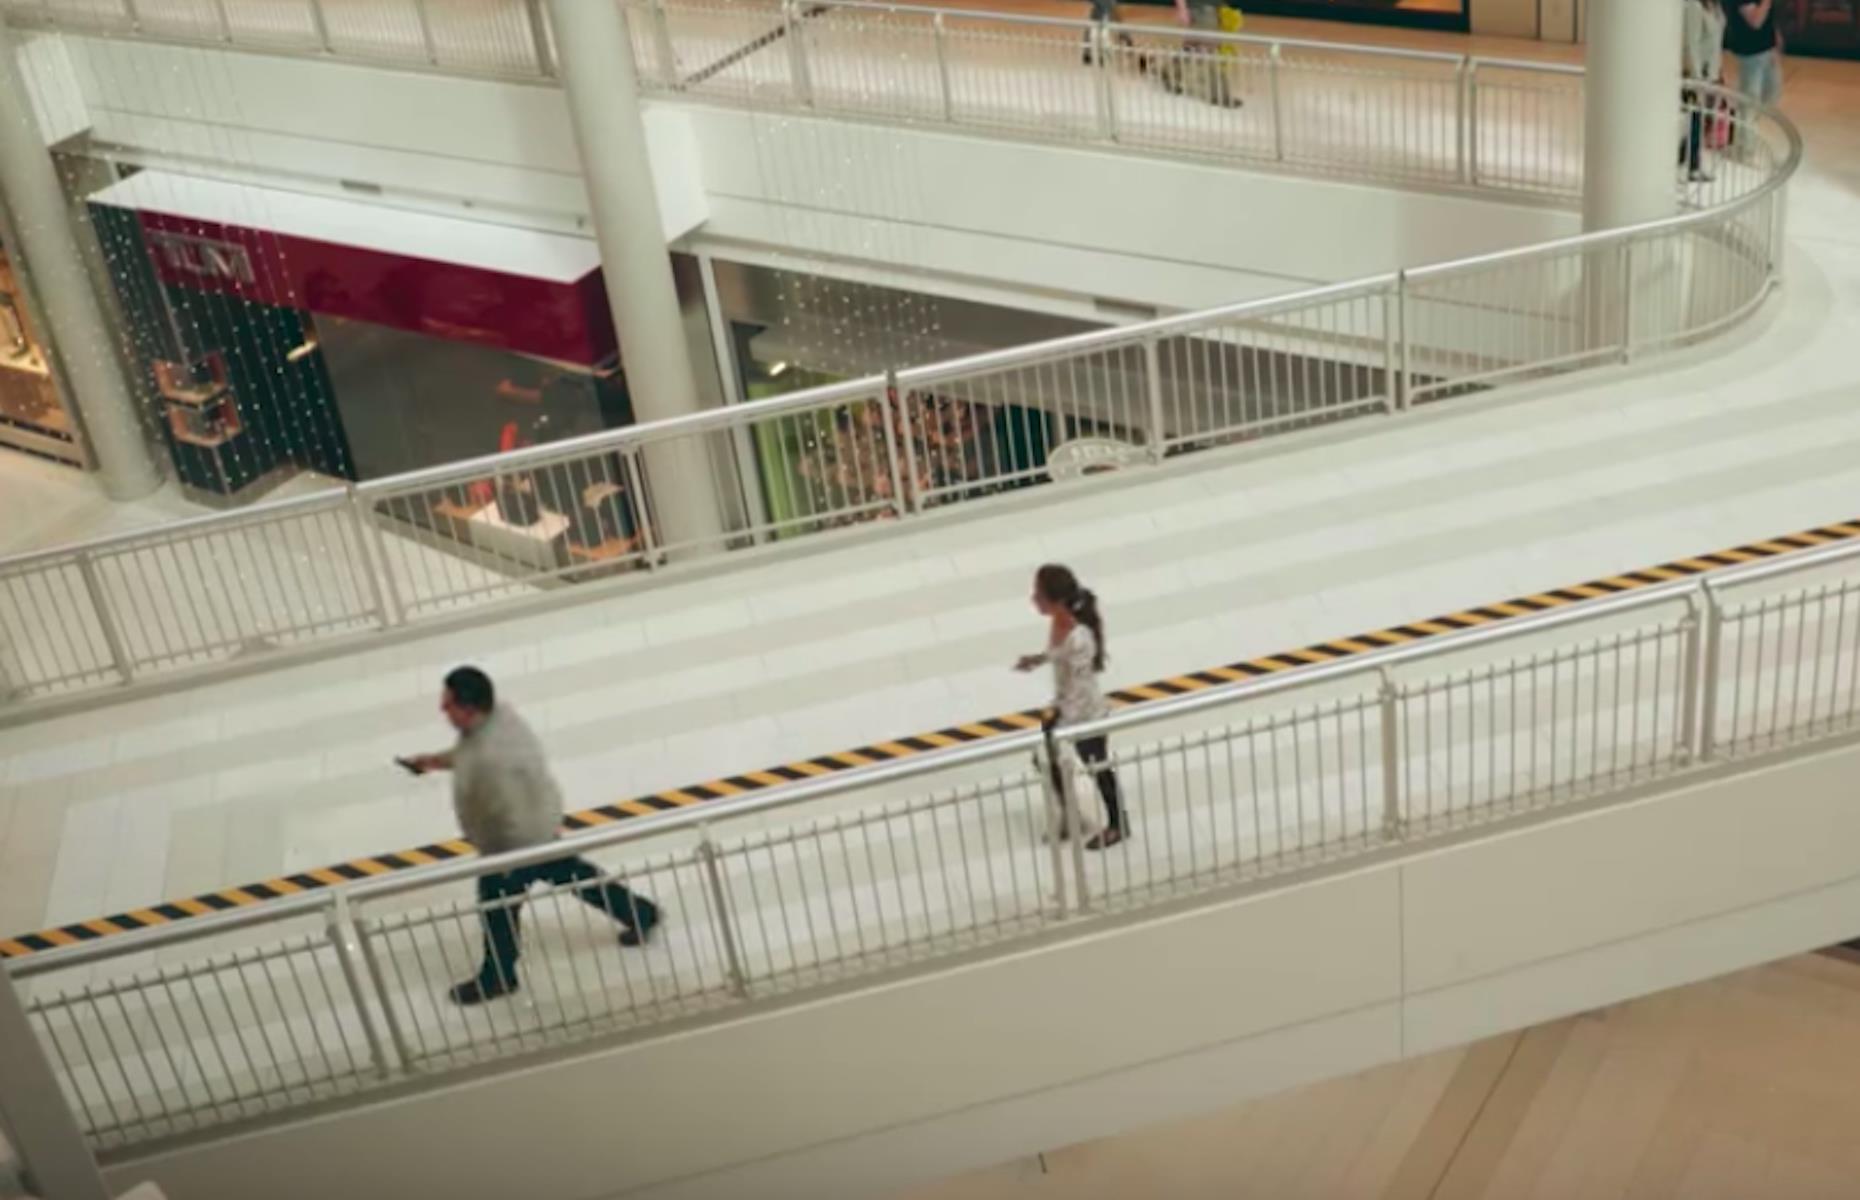 Mall of America marks out texting lanes